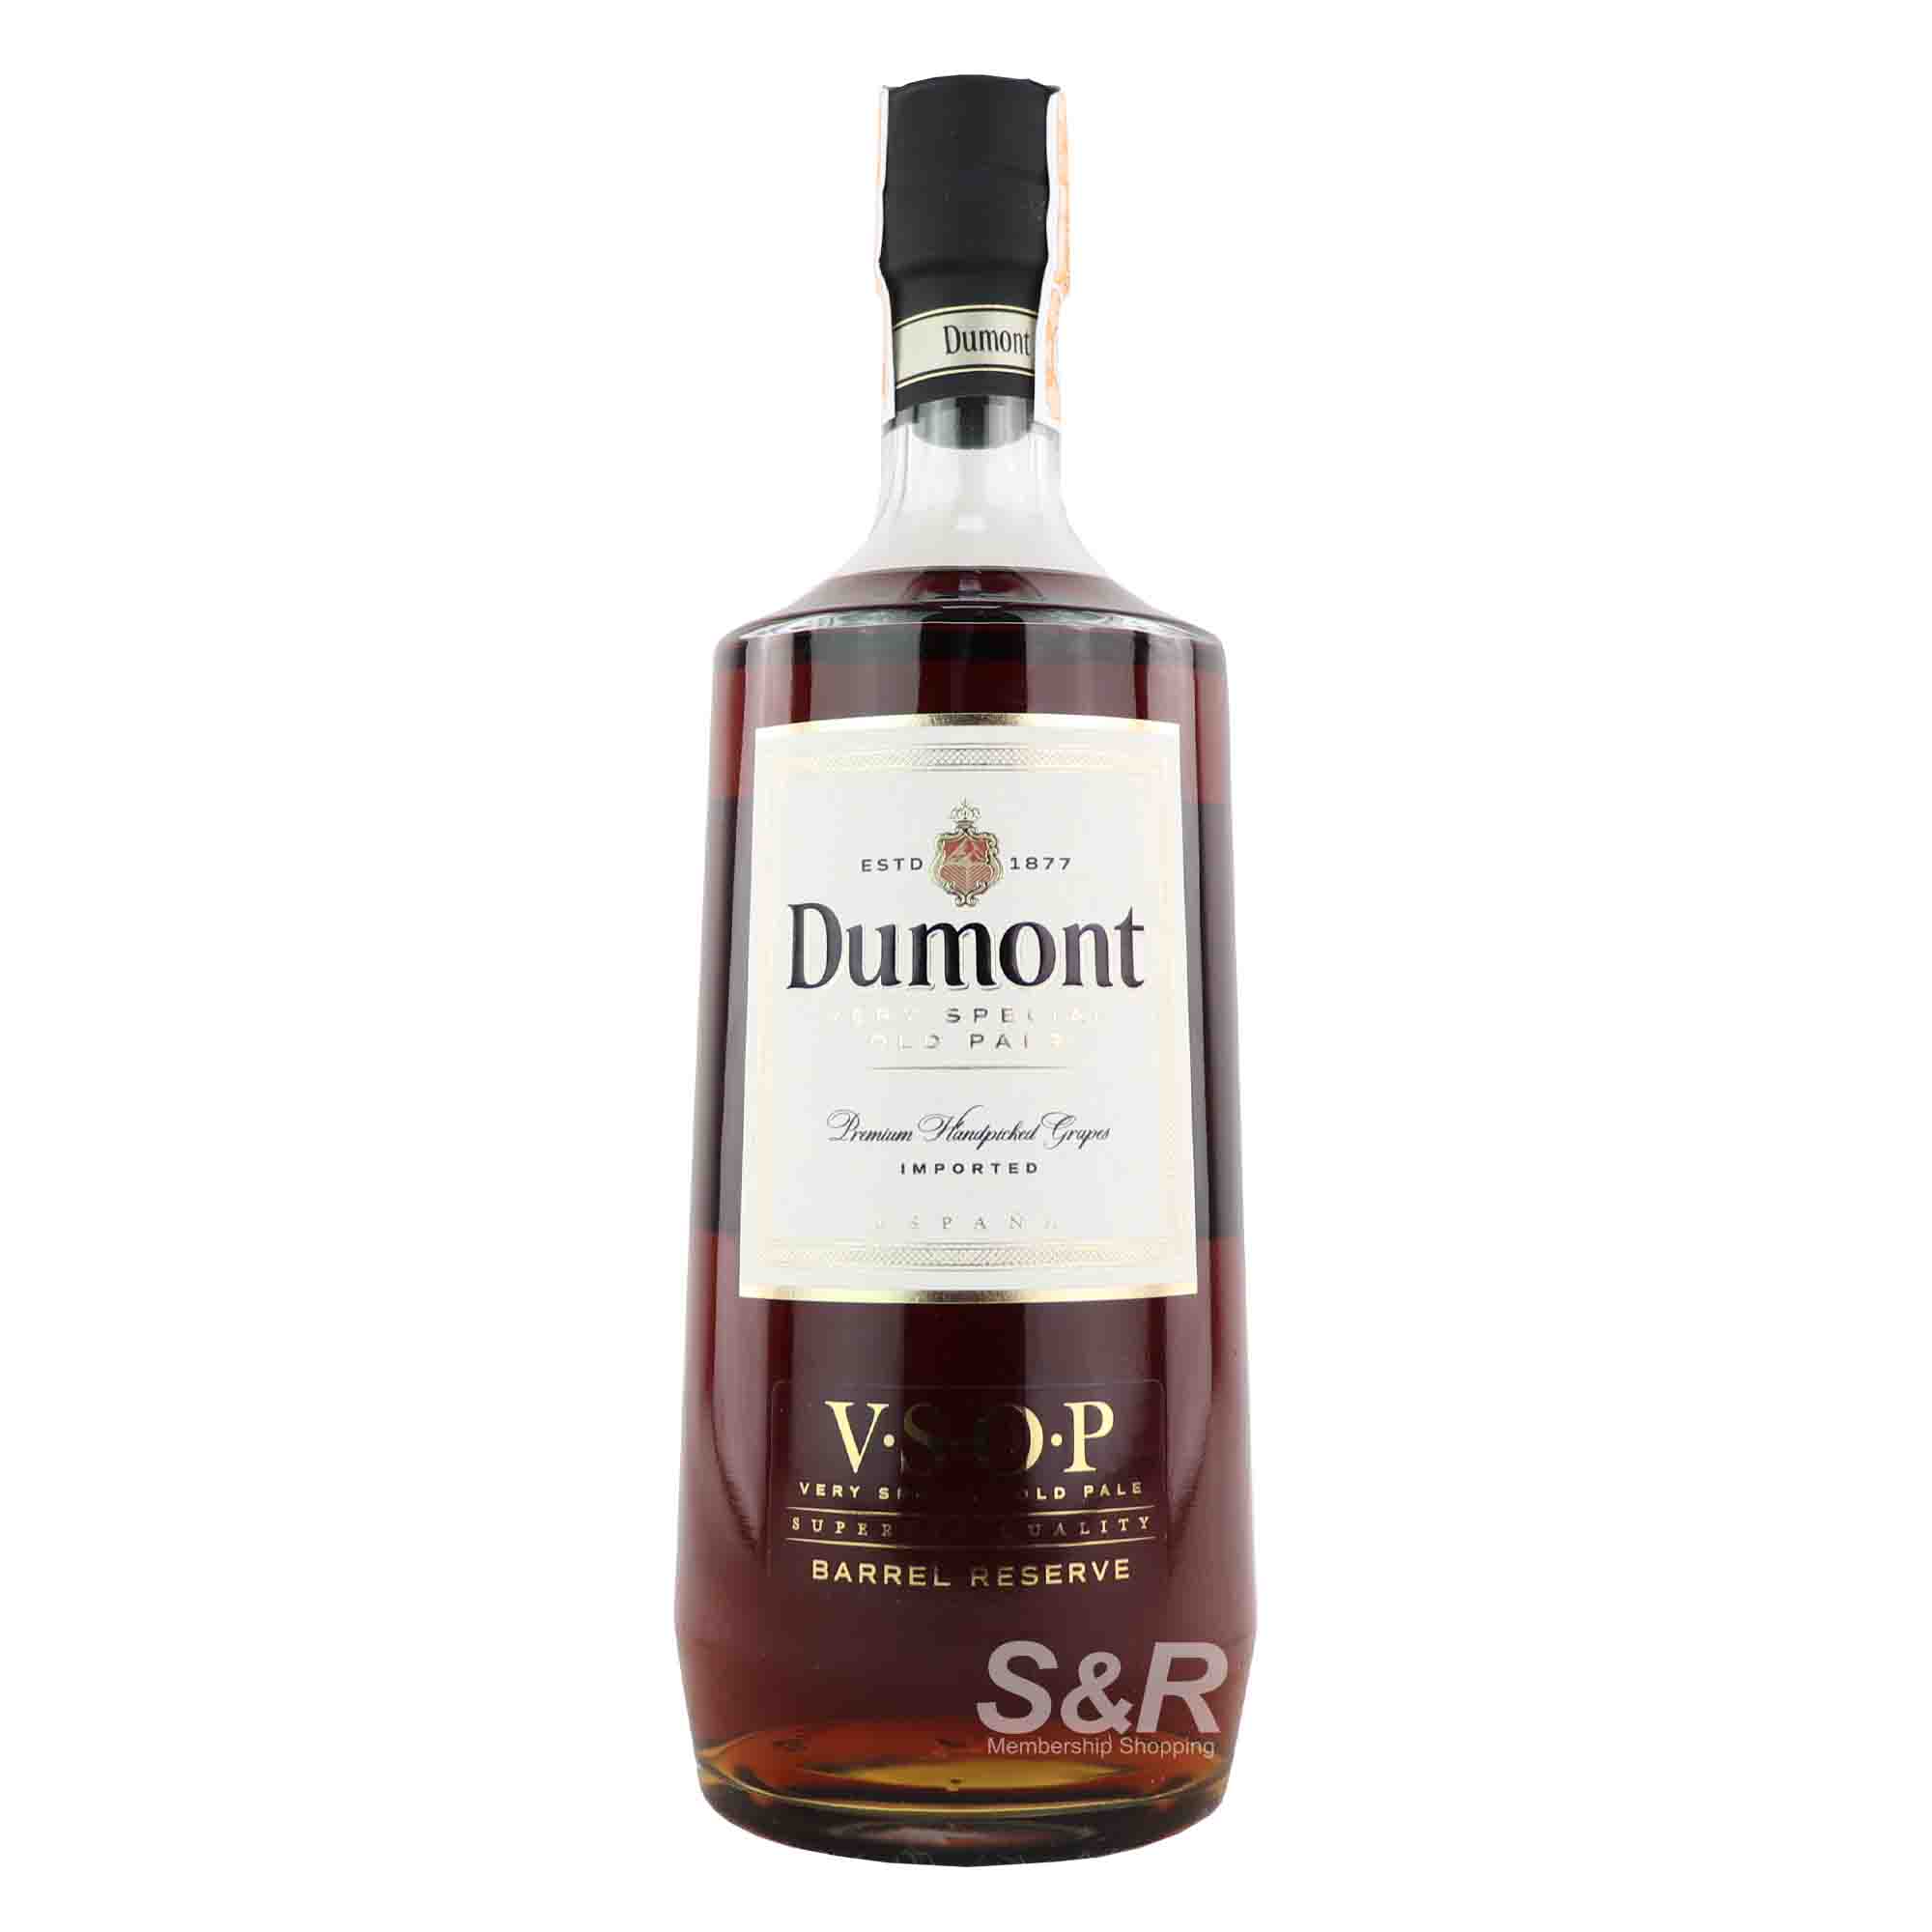 Dumont Very Special Old Pale Brandy 700mL